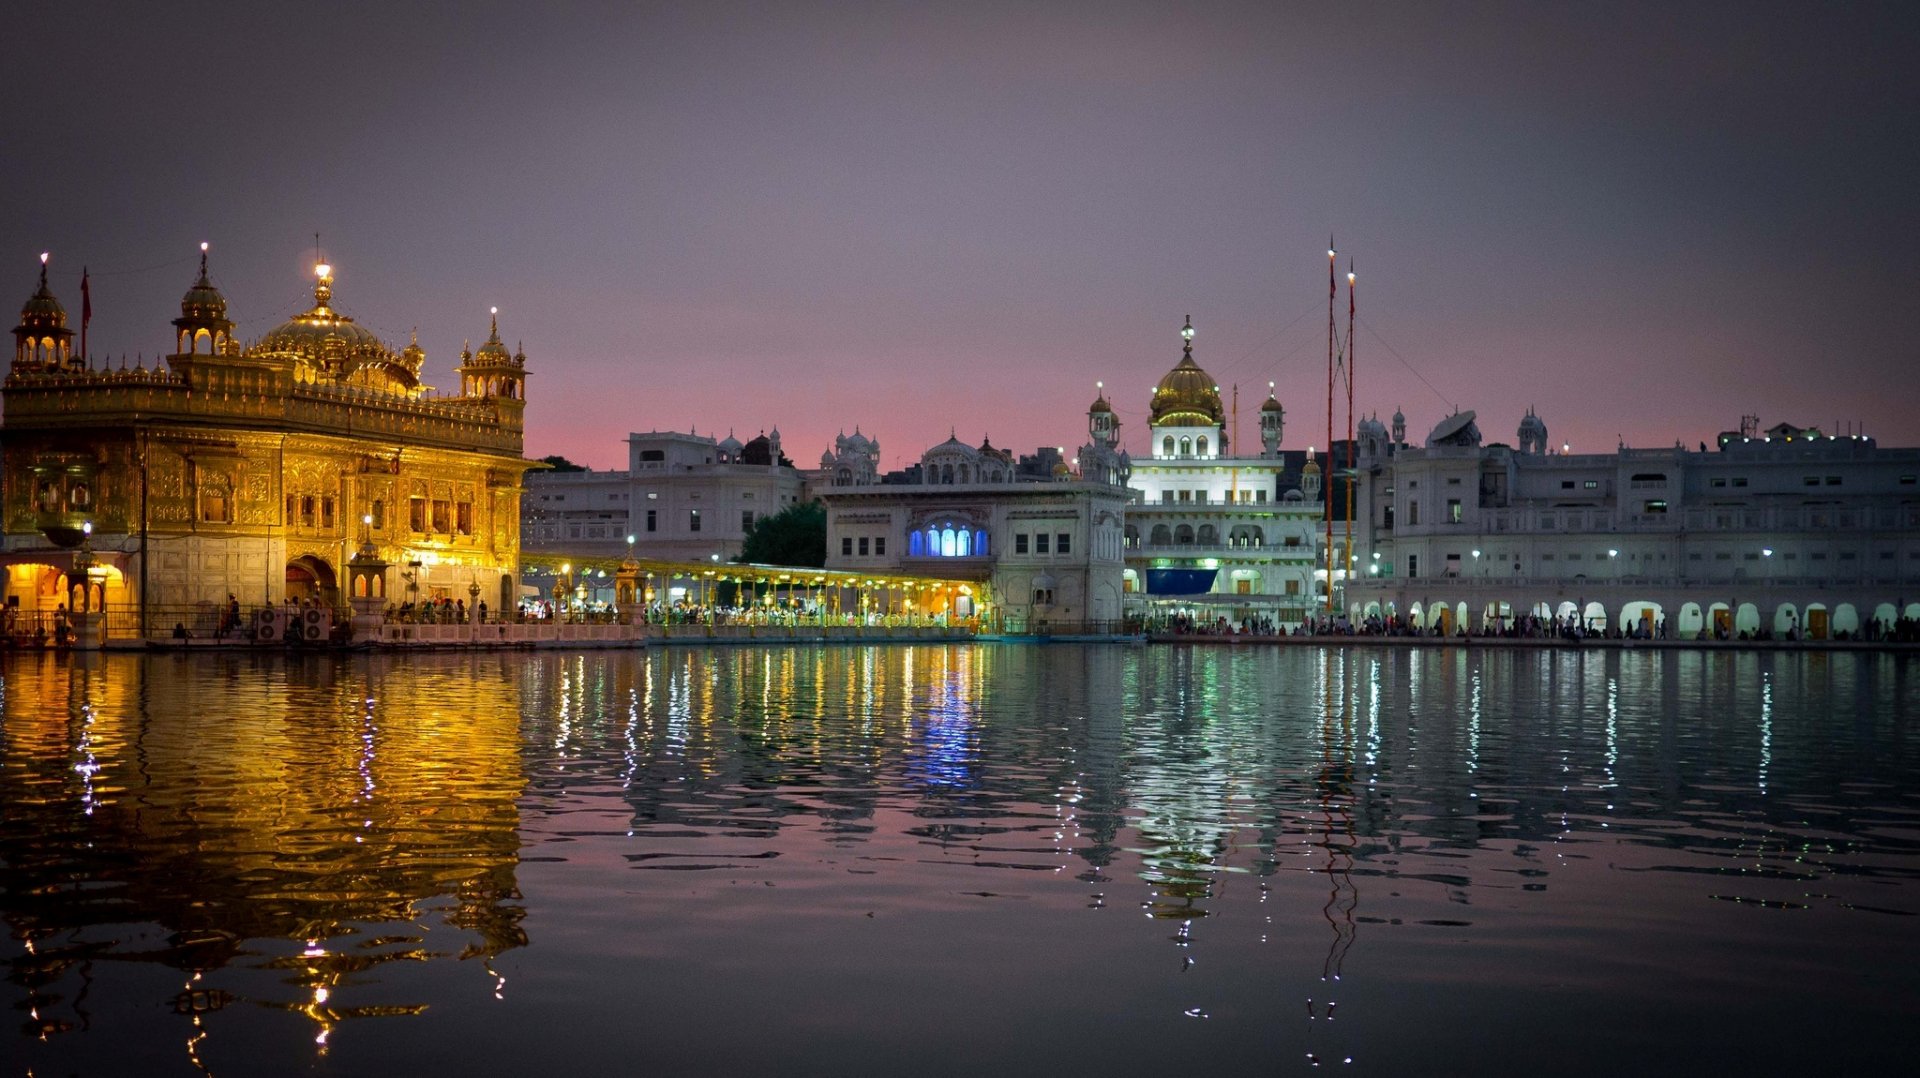 Download Golden Temple wallpapers for mobile phone free Golden Temple  HD pictures